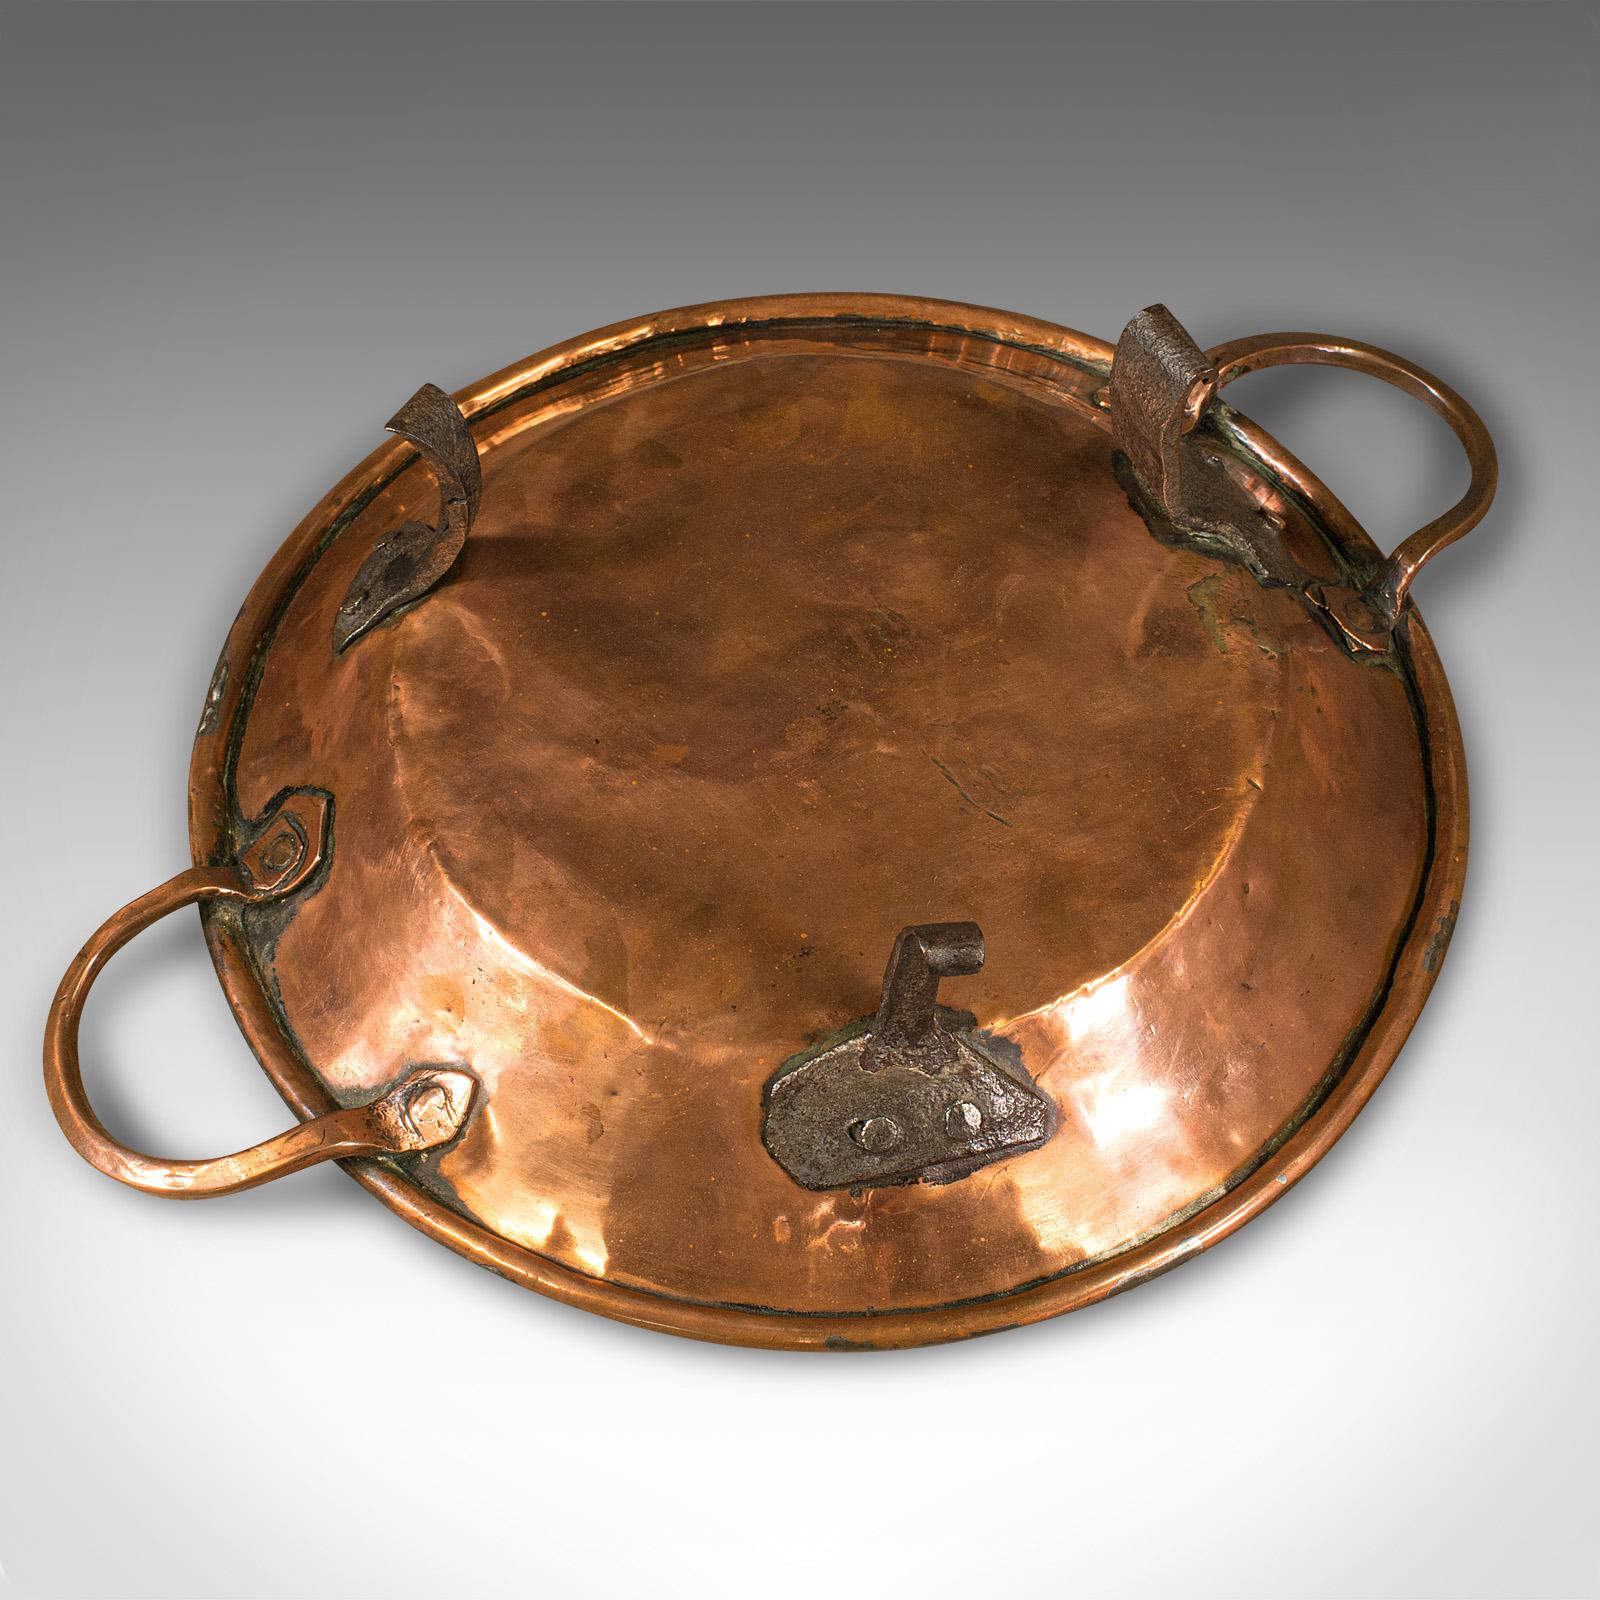 Antique Cooking Dish, English, Copper, Decorative Tray, Historic, Georgian, 1750 For Sale 5